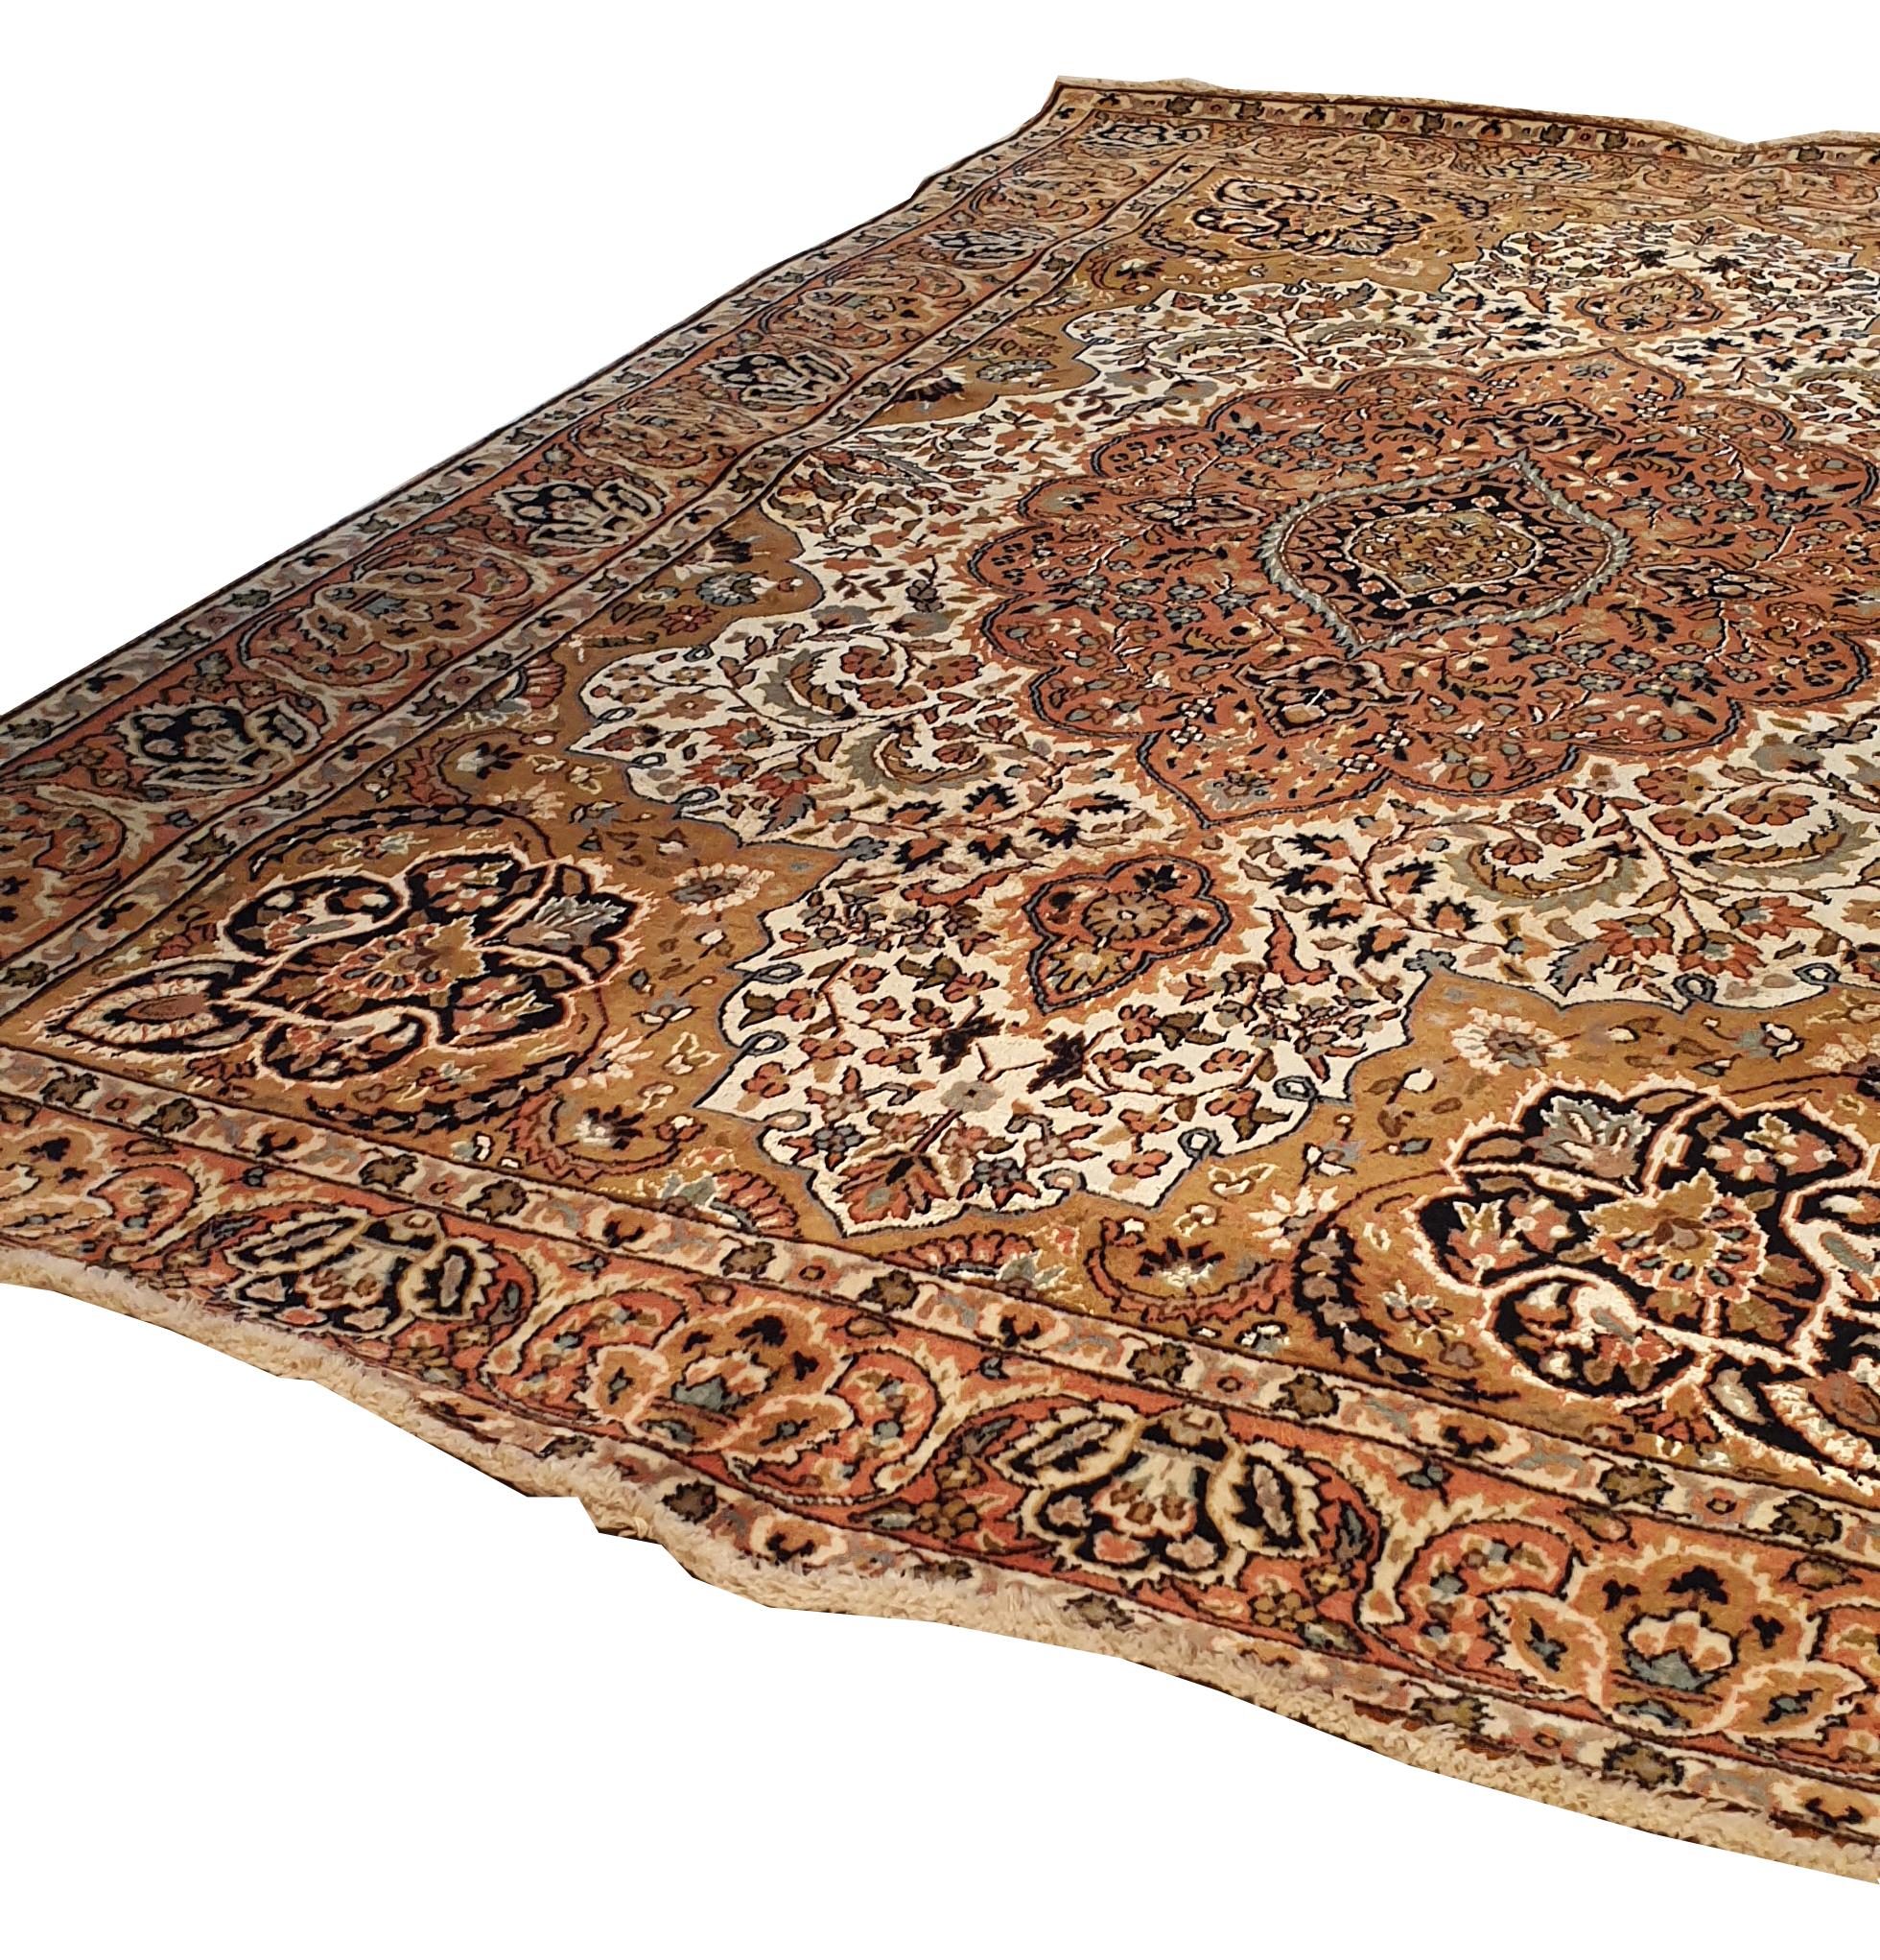 Rustic  Indian Carpet Wool and Silk, 20th Century - N° 736 For Sale